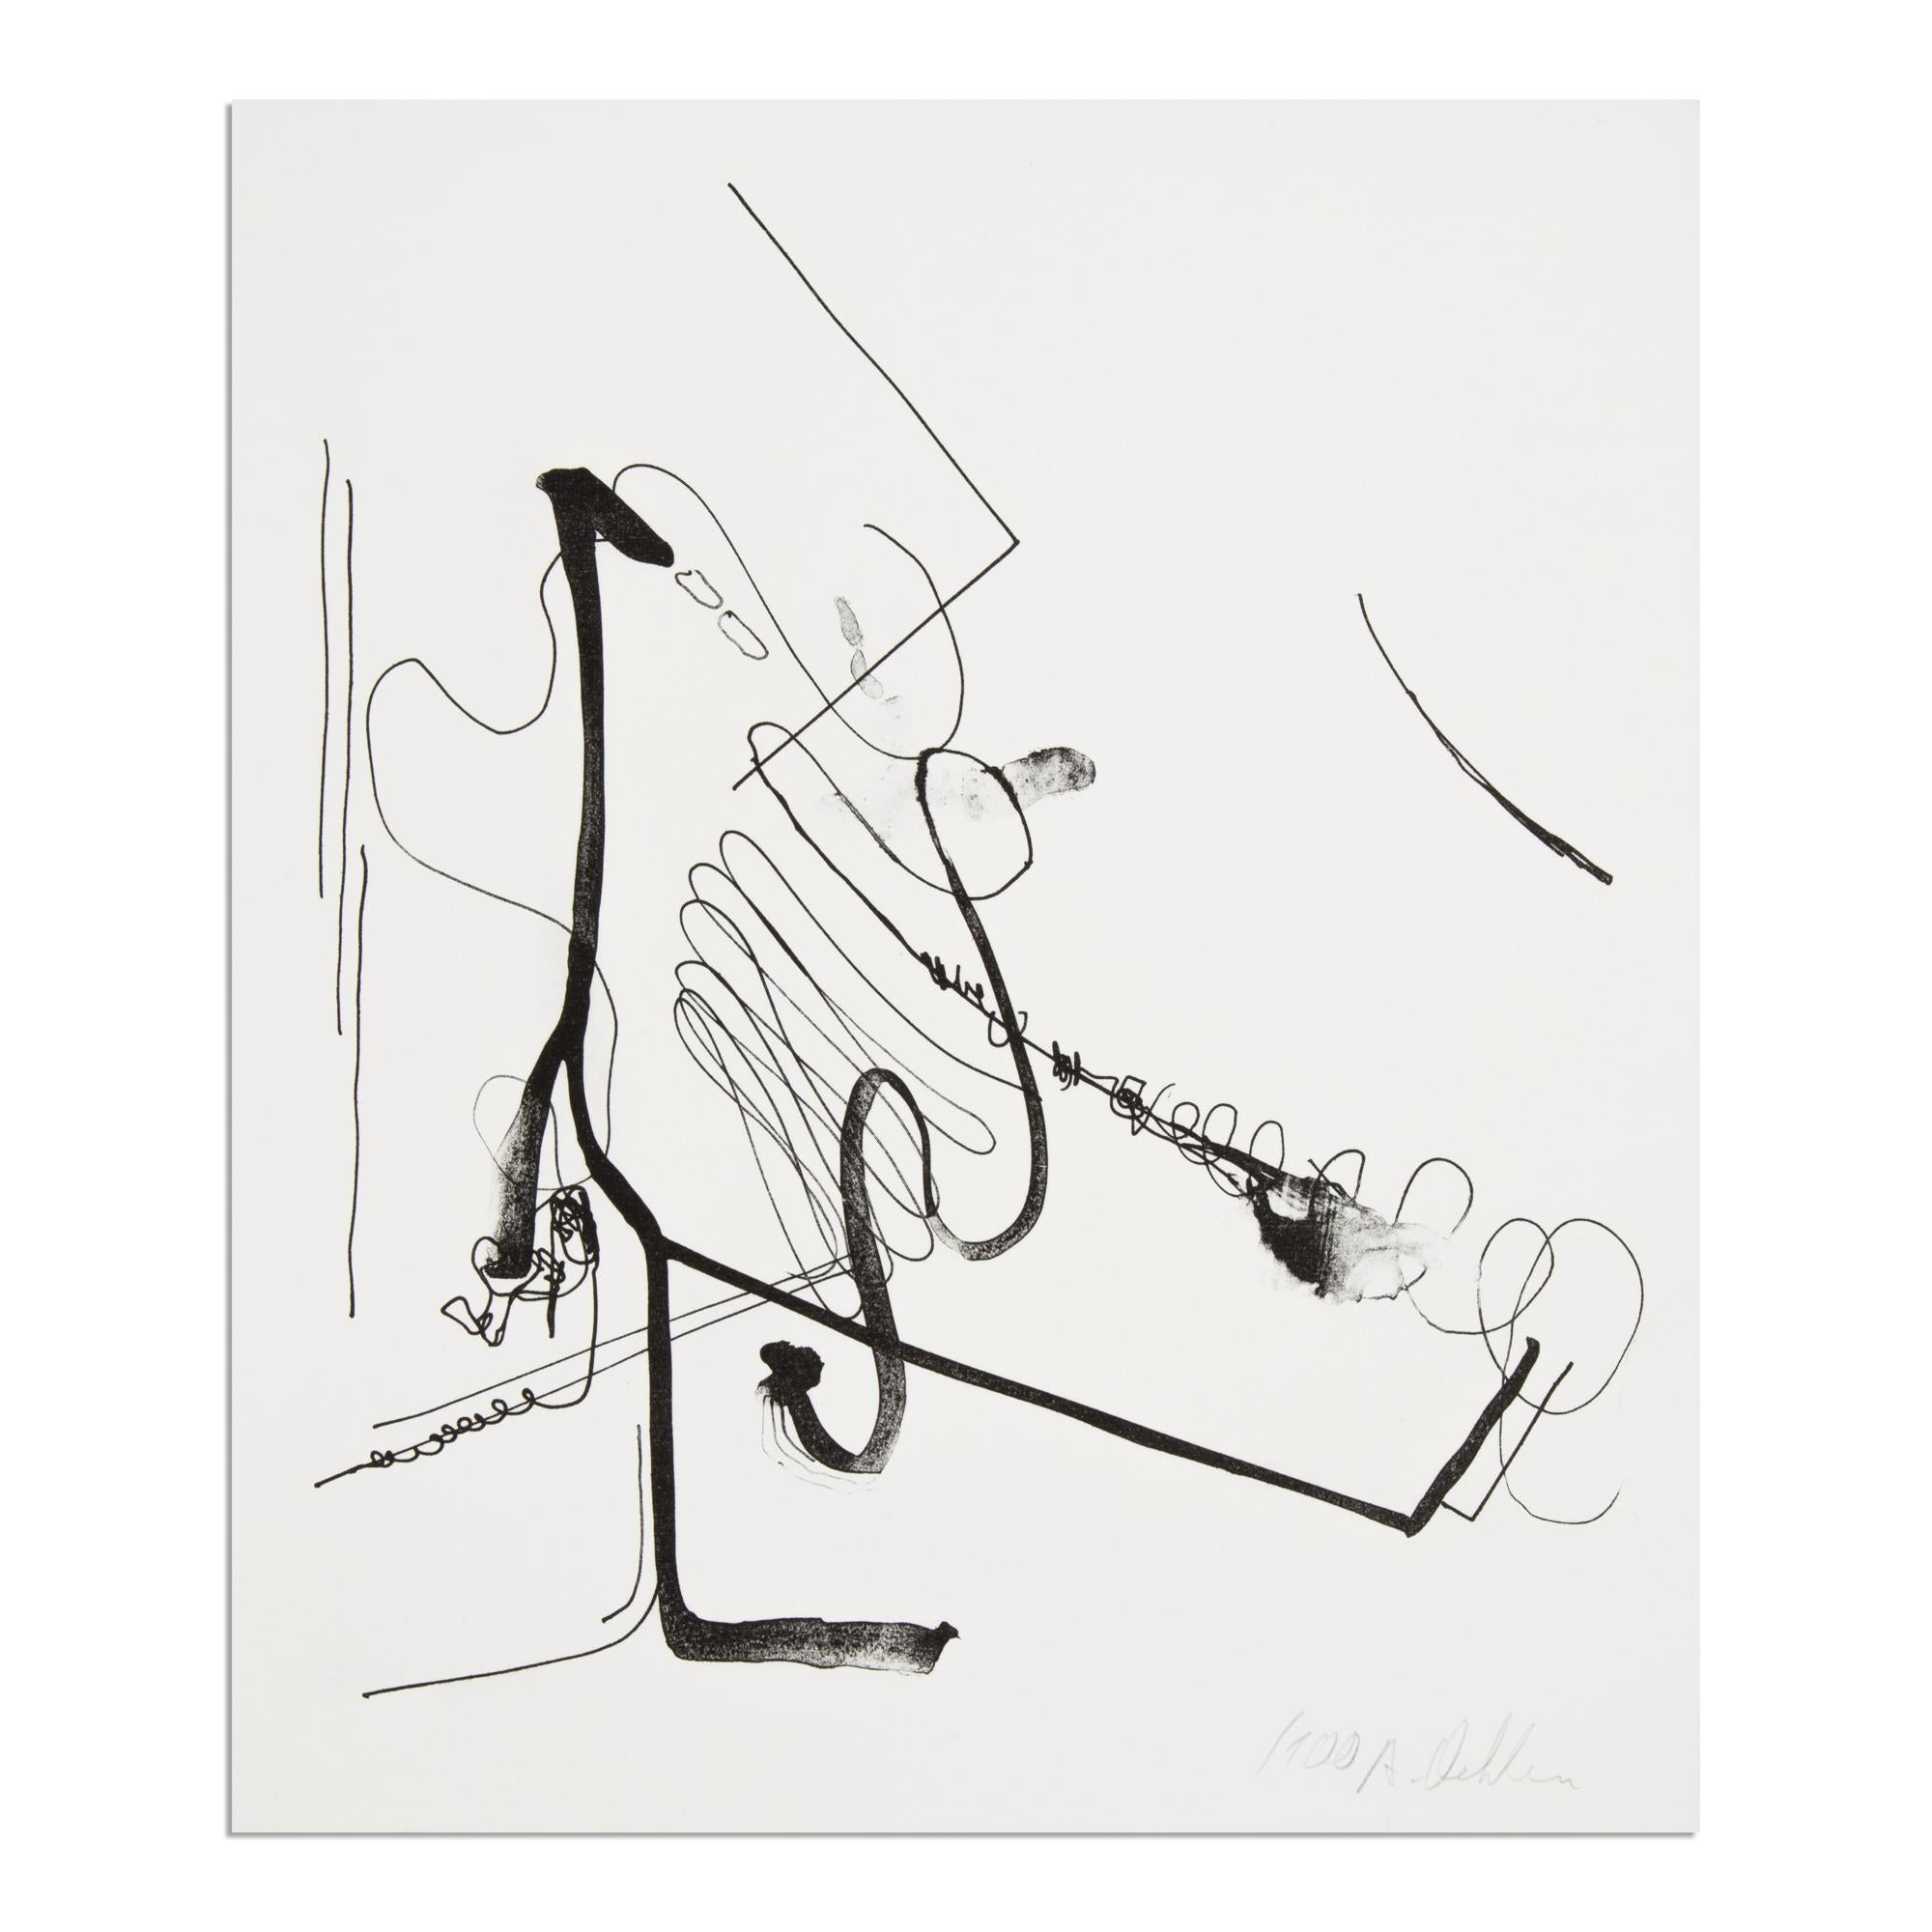 Albert Oehlen (German, b. 1954)
Meditation über Bürokratische Tendenzen bei TzK, 2020
Medium: Lithograph on paper
Dimensions: 36.2 × 30.6 cm (14 3/10 × 12 in)
Edition of 100: Hand-signed and numbered
Condition: Mint